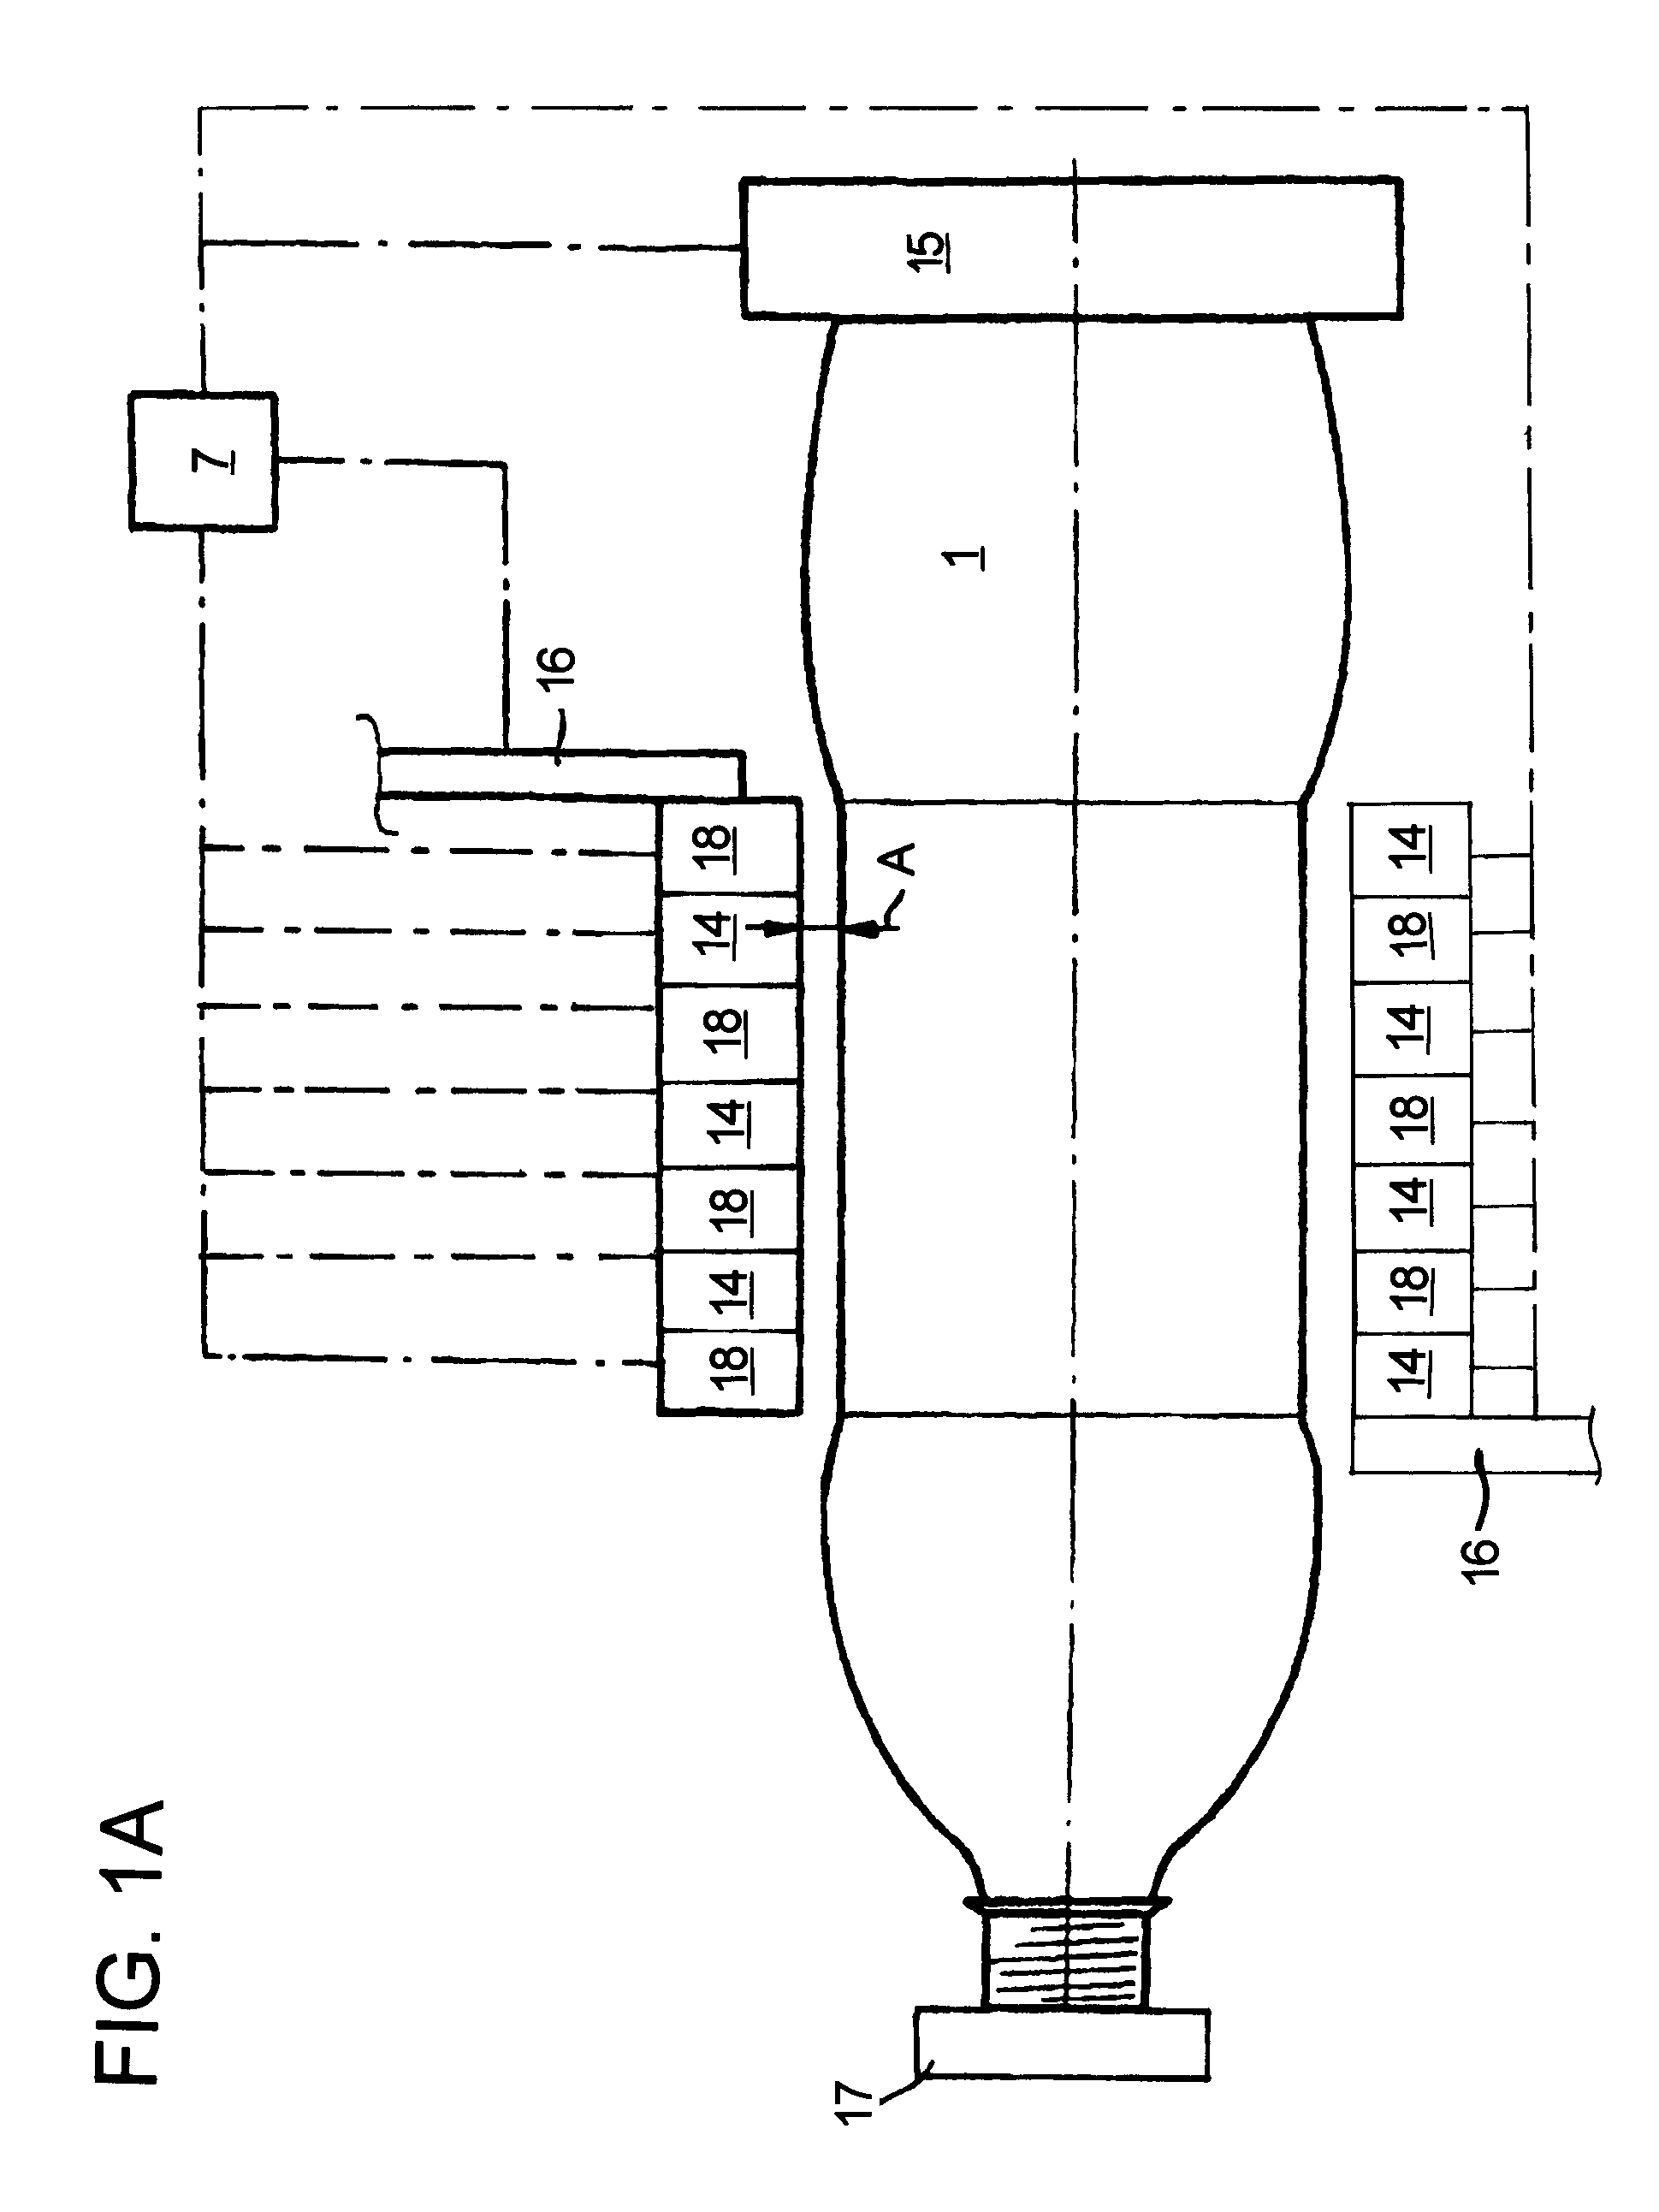 Method and apparatus for the circumferential printing onto individual bottles in a run of bottles where the individual bottles in the run have at least one varying dimension due to manufacturing tolerances, the method and apparatus providing more consistent artwork on individual containers in the run of containers